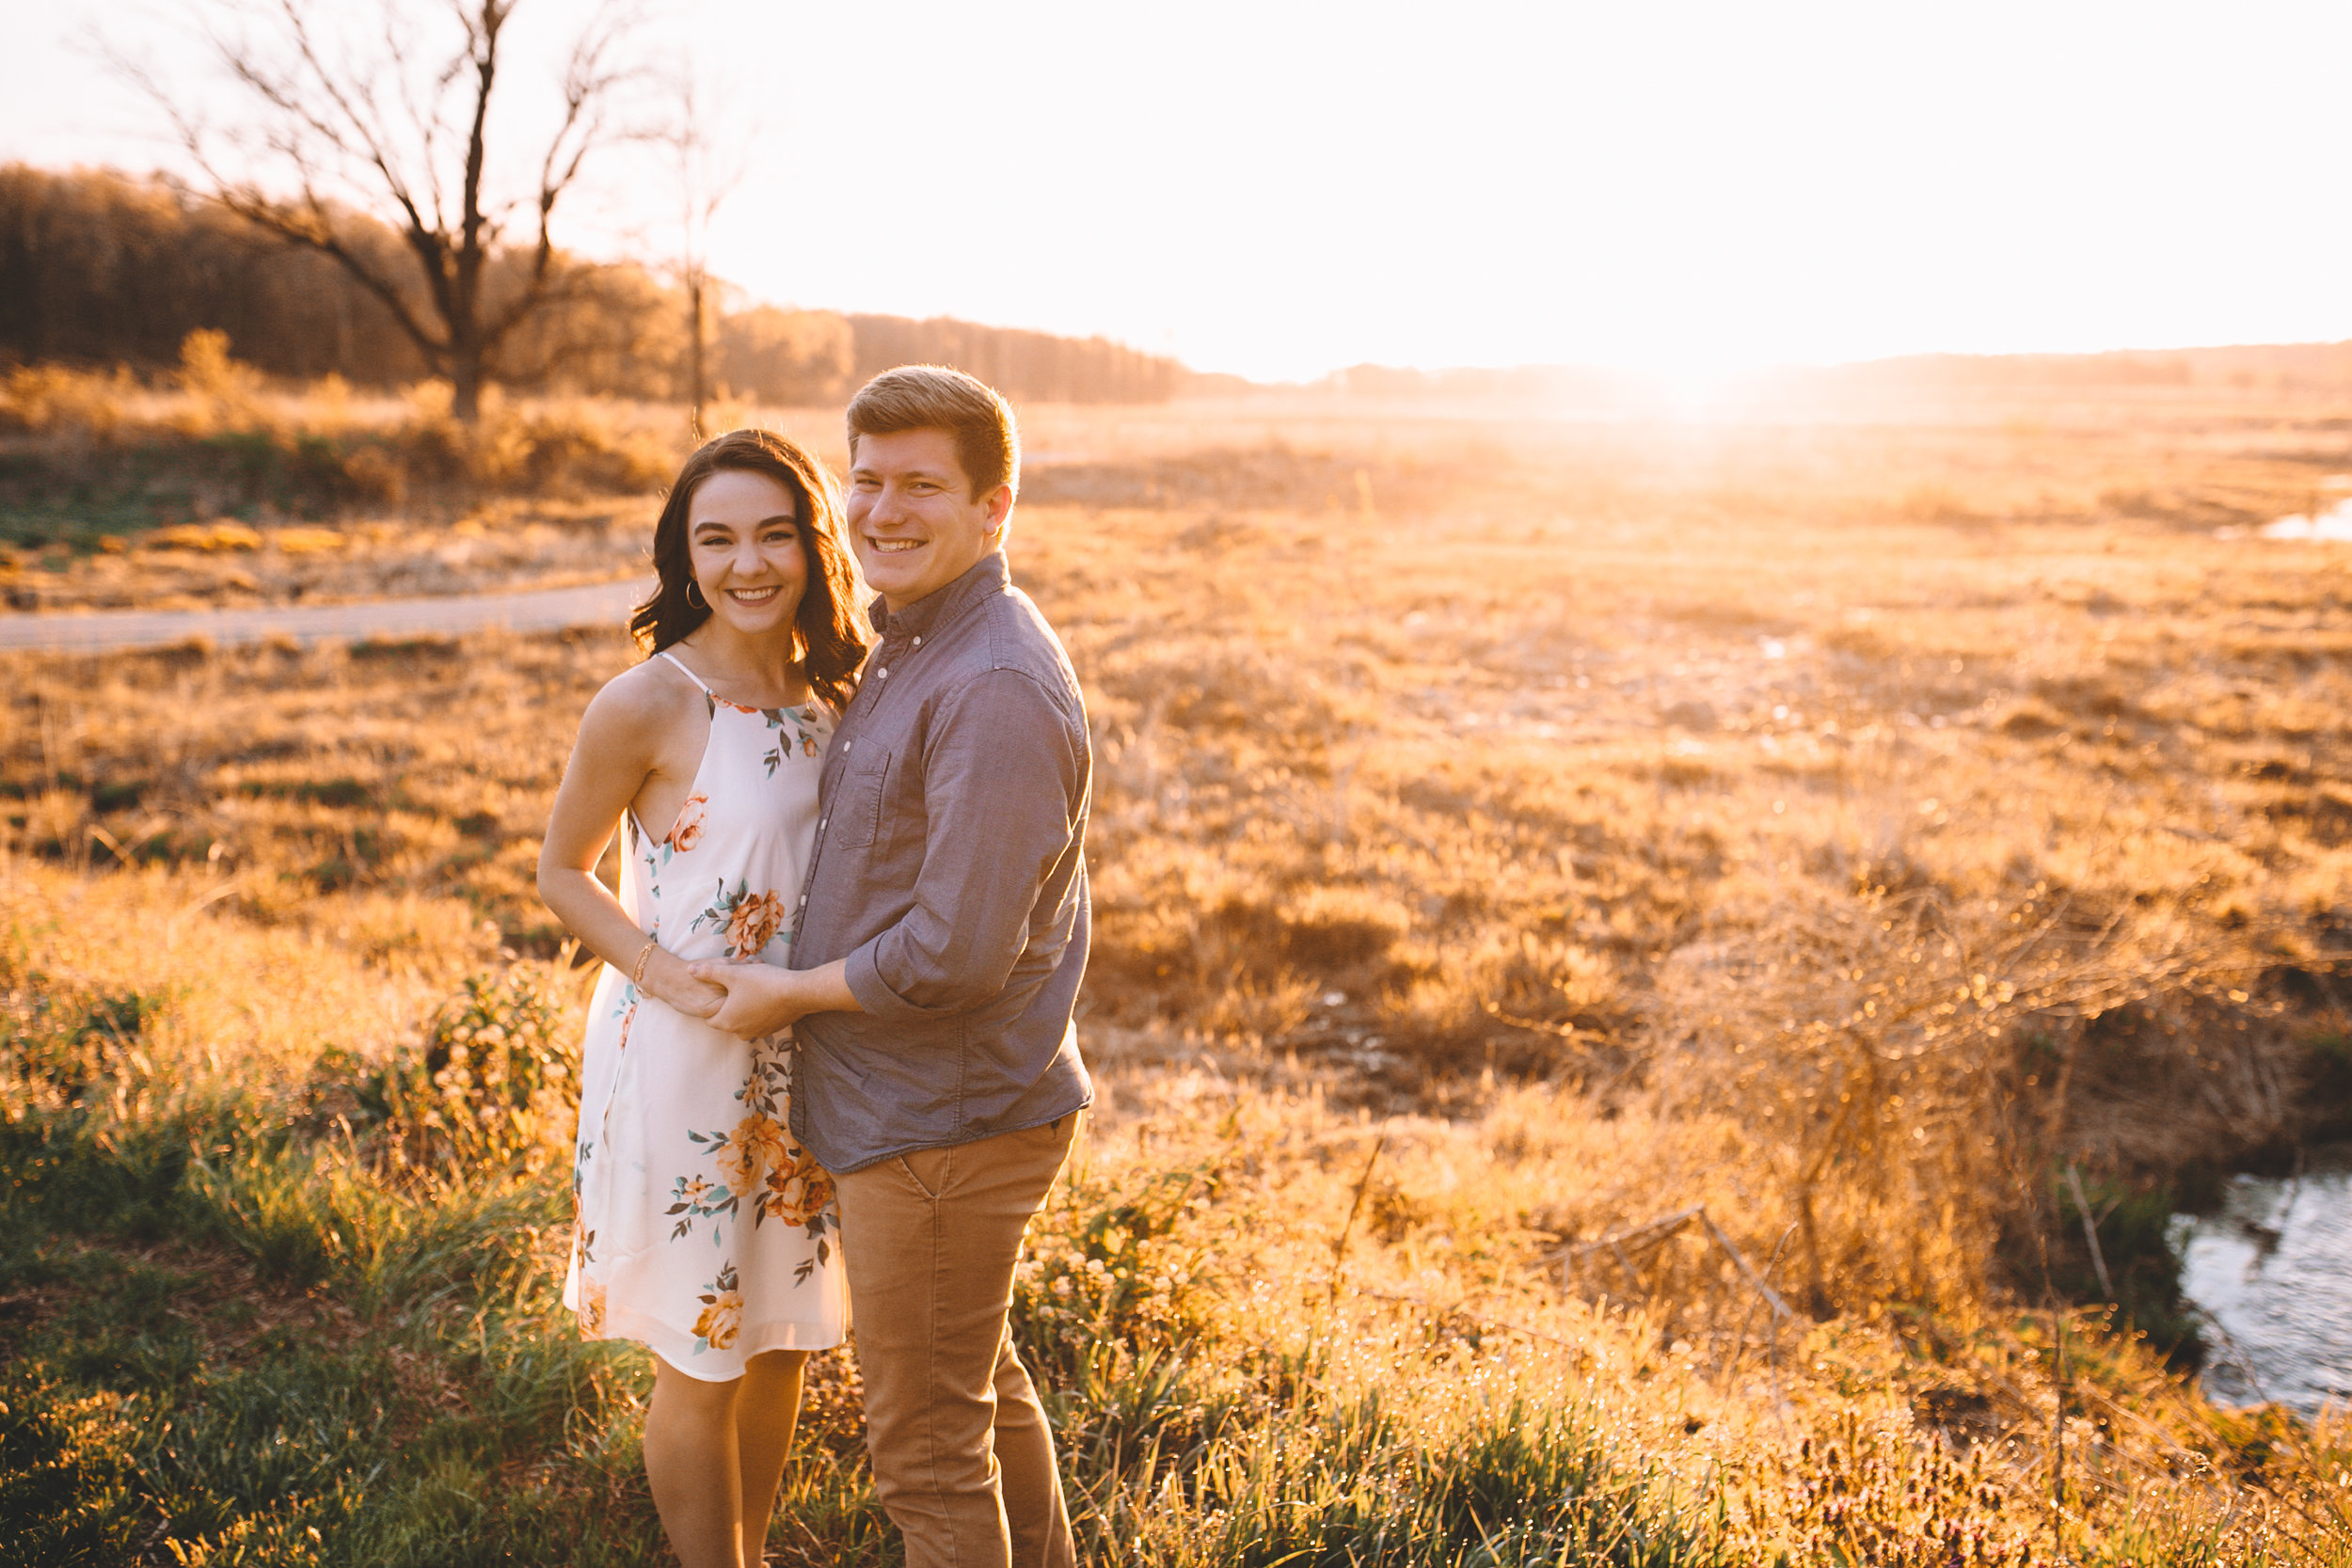 Will + Erin Engagement Photos at Prophetstown State Park  (38 of 183).jpg